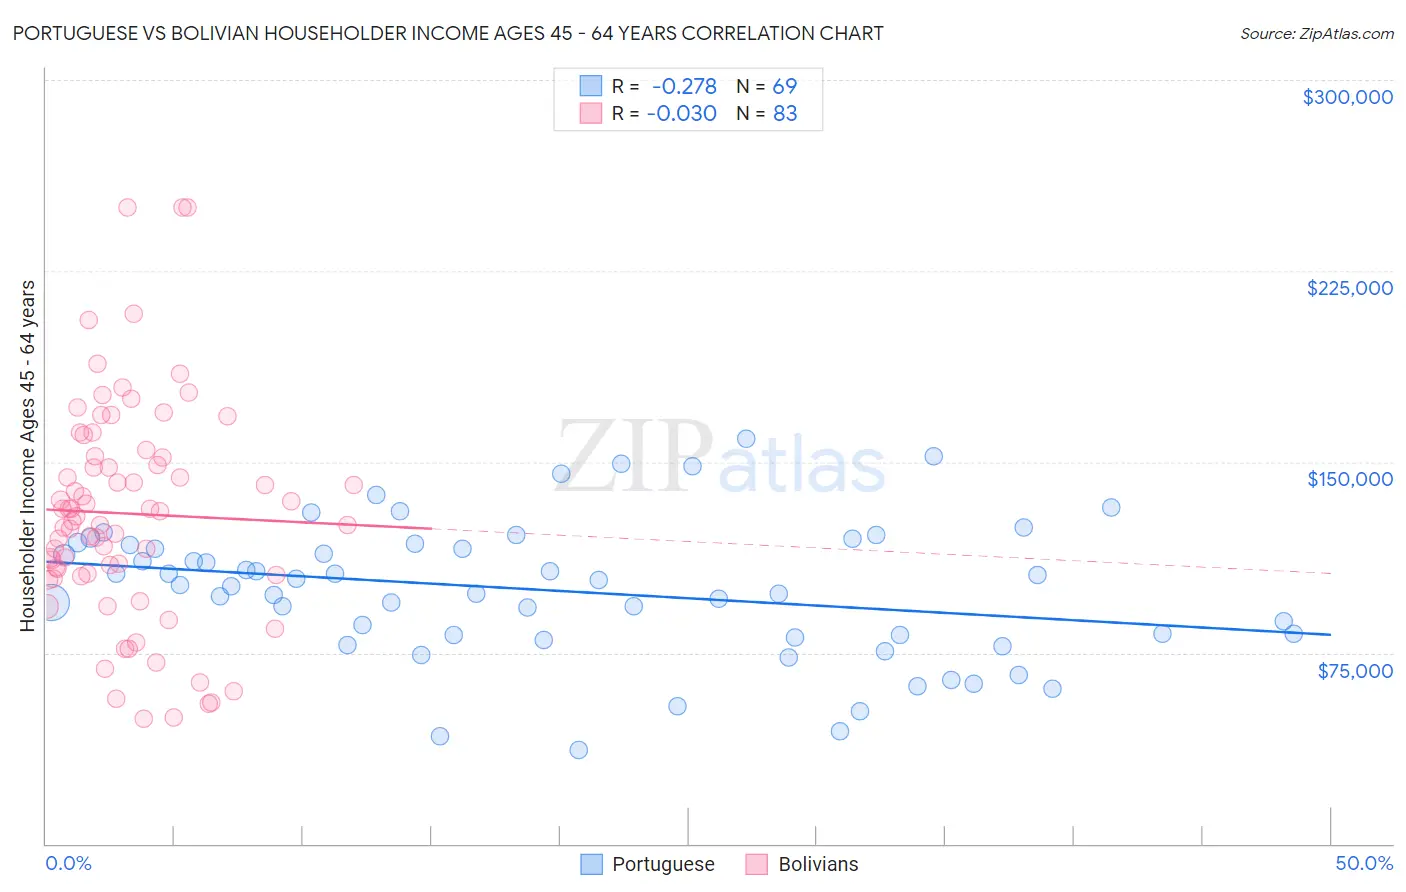 Portuguese vs Bolivian Householder Income Ages 45 - 64 years